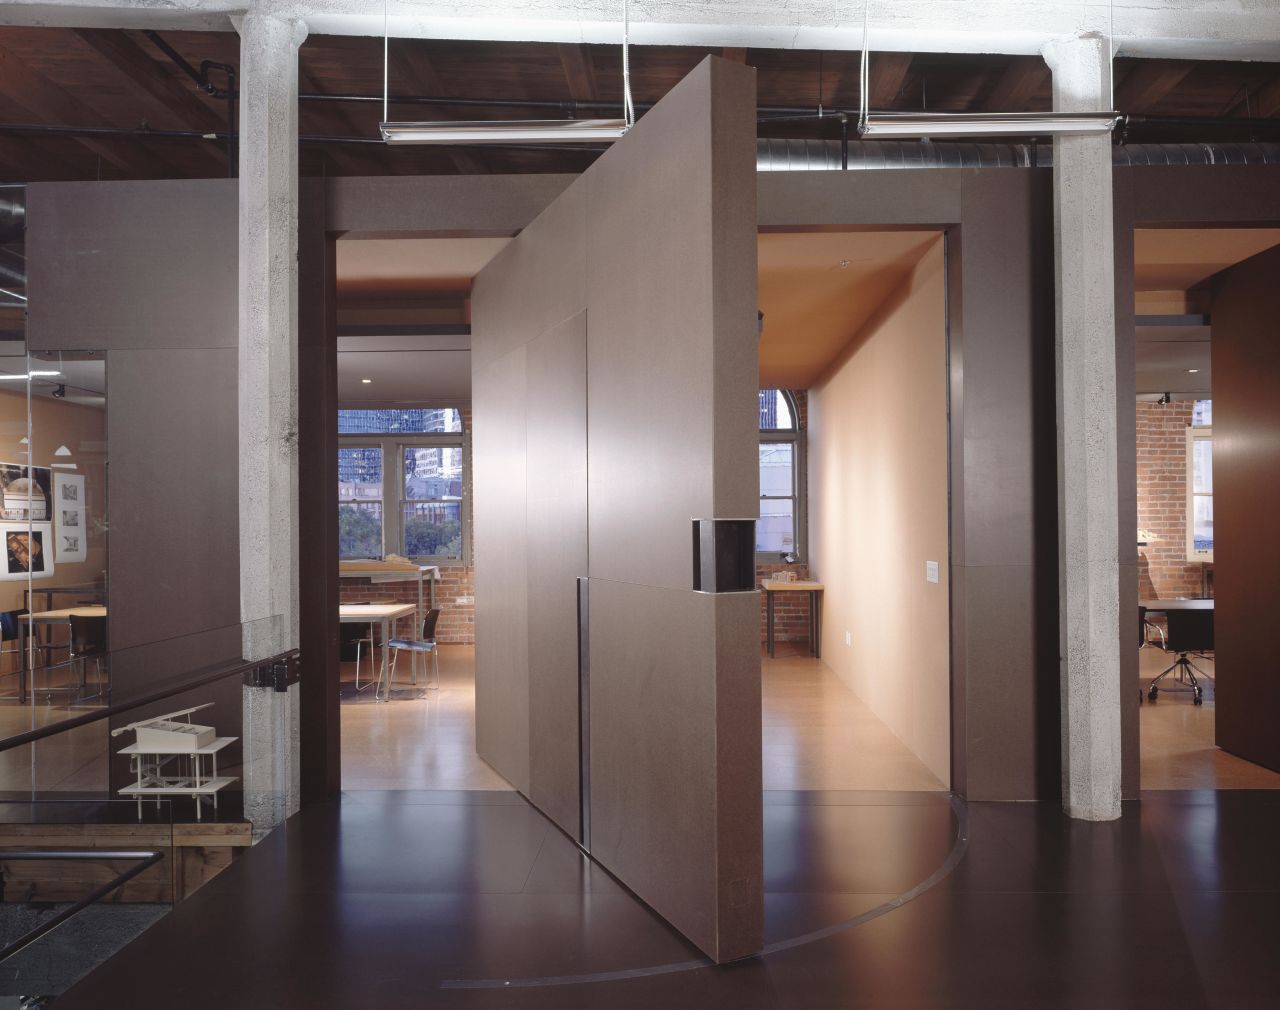 Olson Kundig's sleek offices are located in the historic Pioneer Square neighborhood.